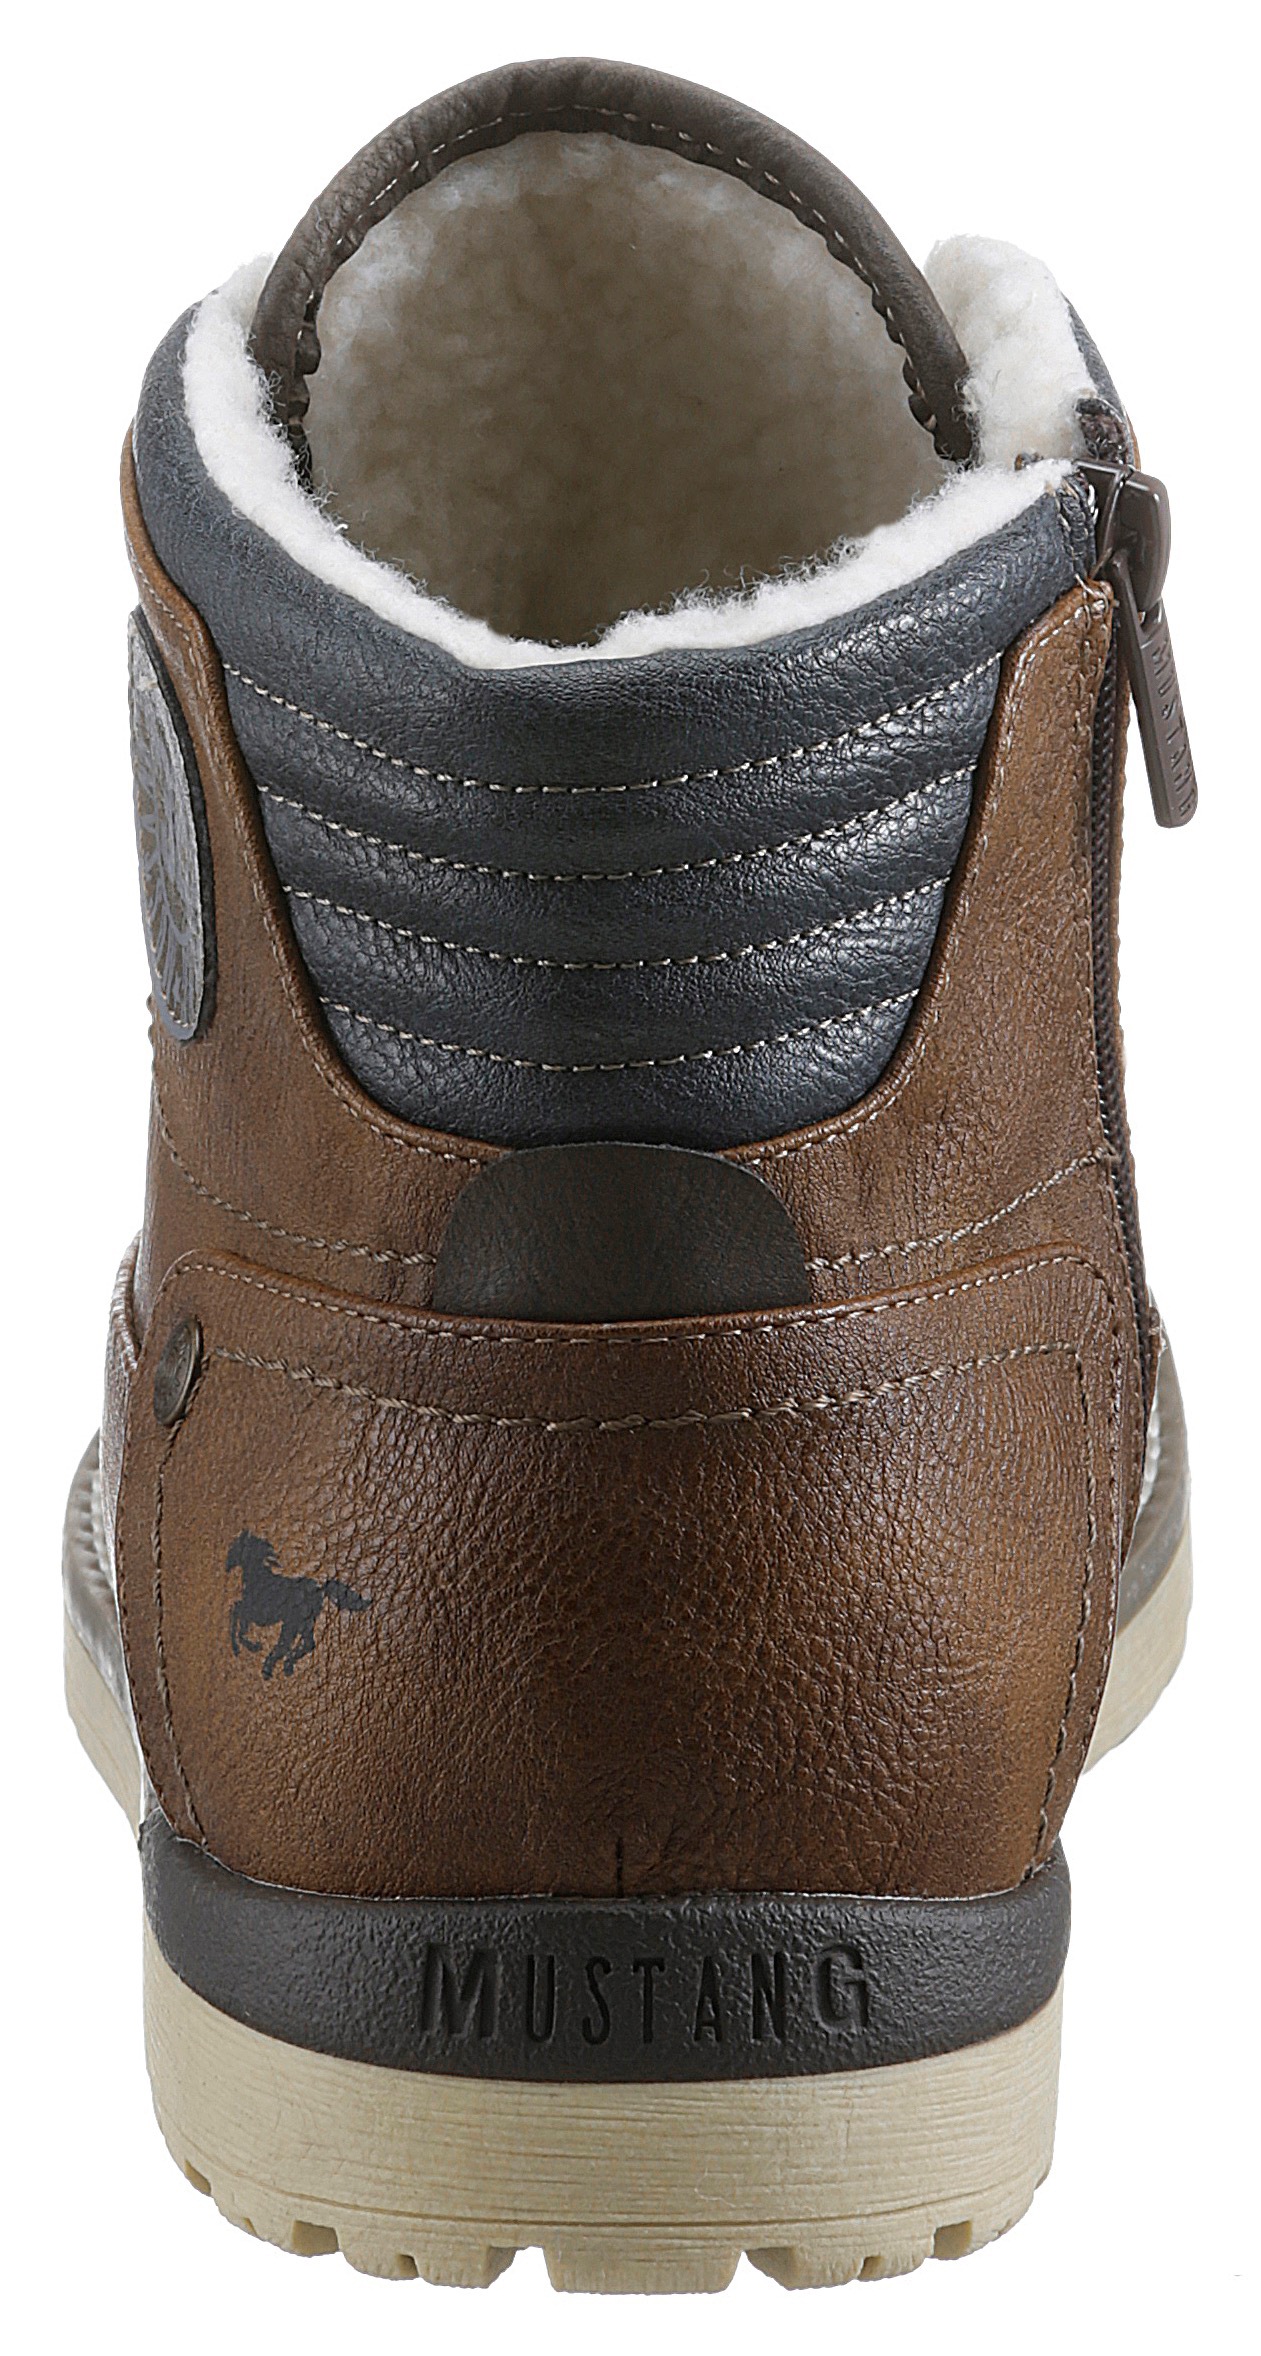 Mustang Shoes Schnürboots, mit Warmfutter